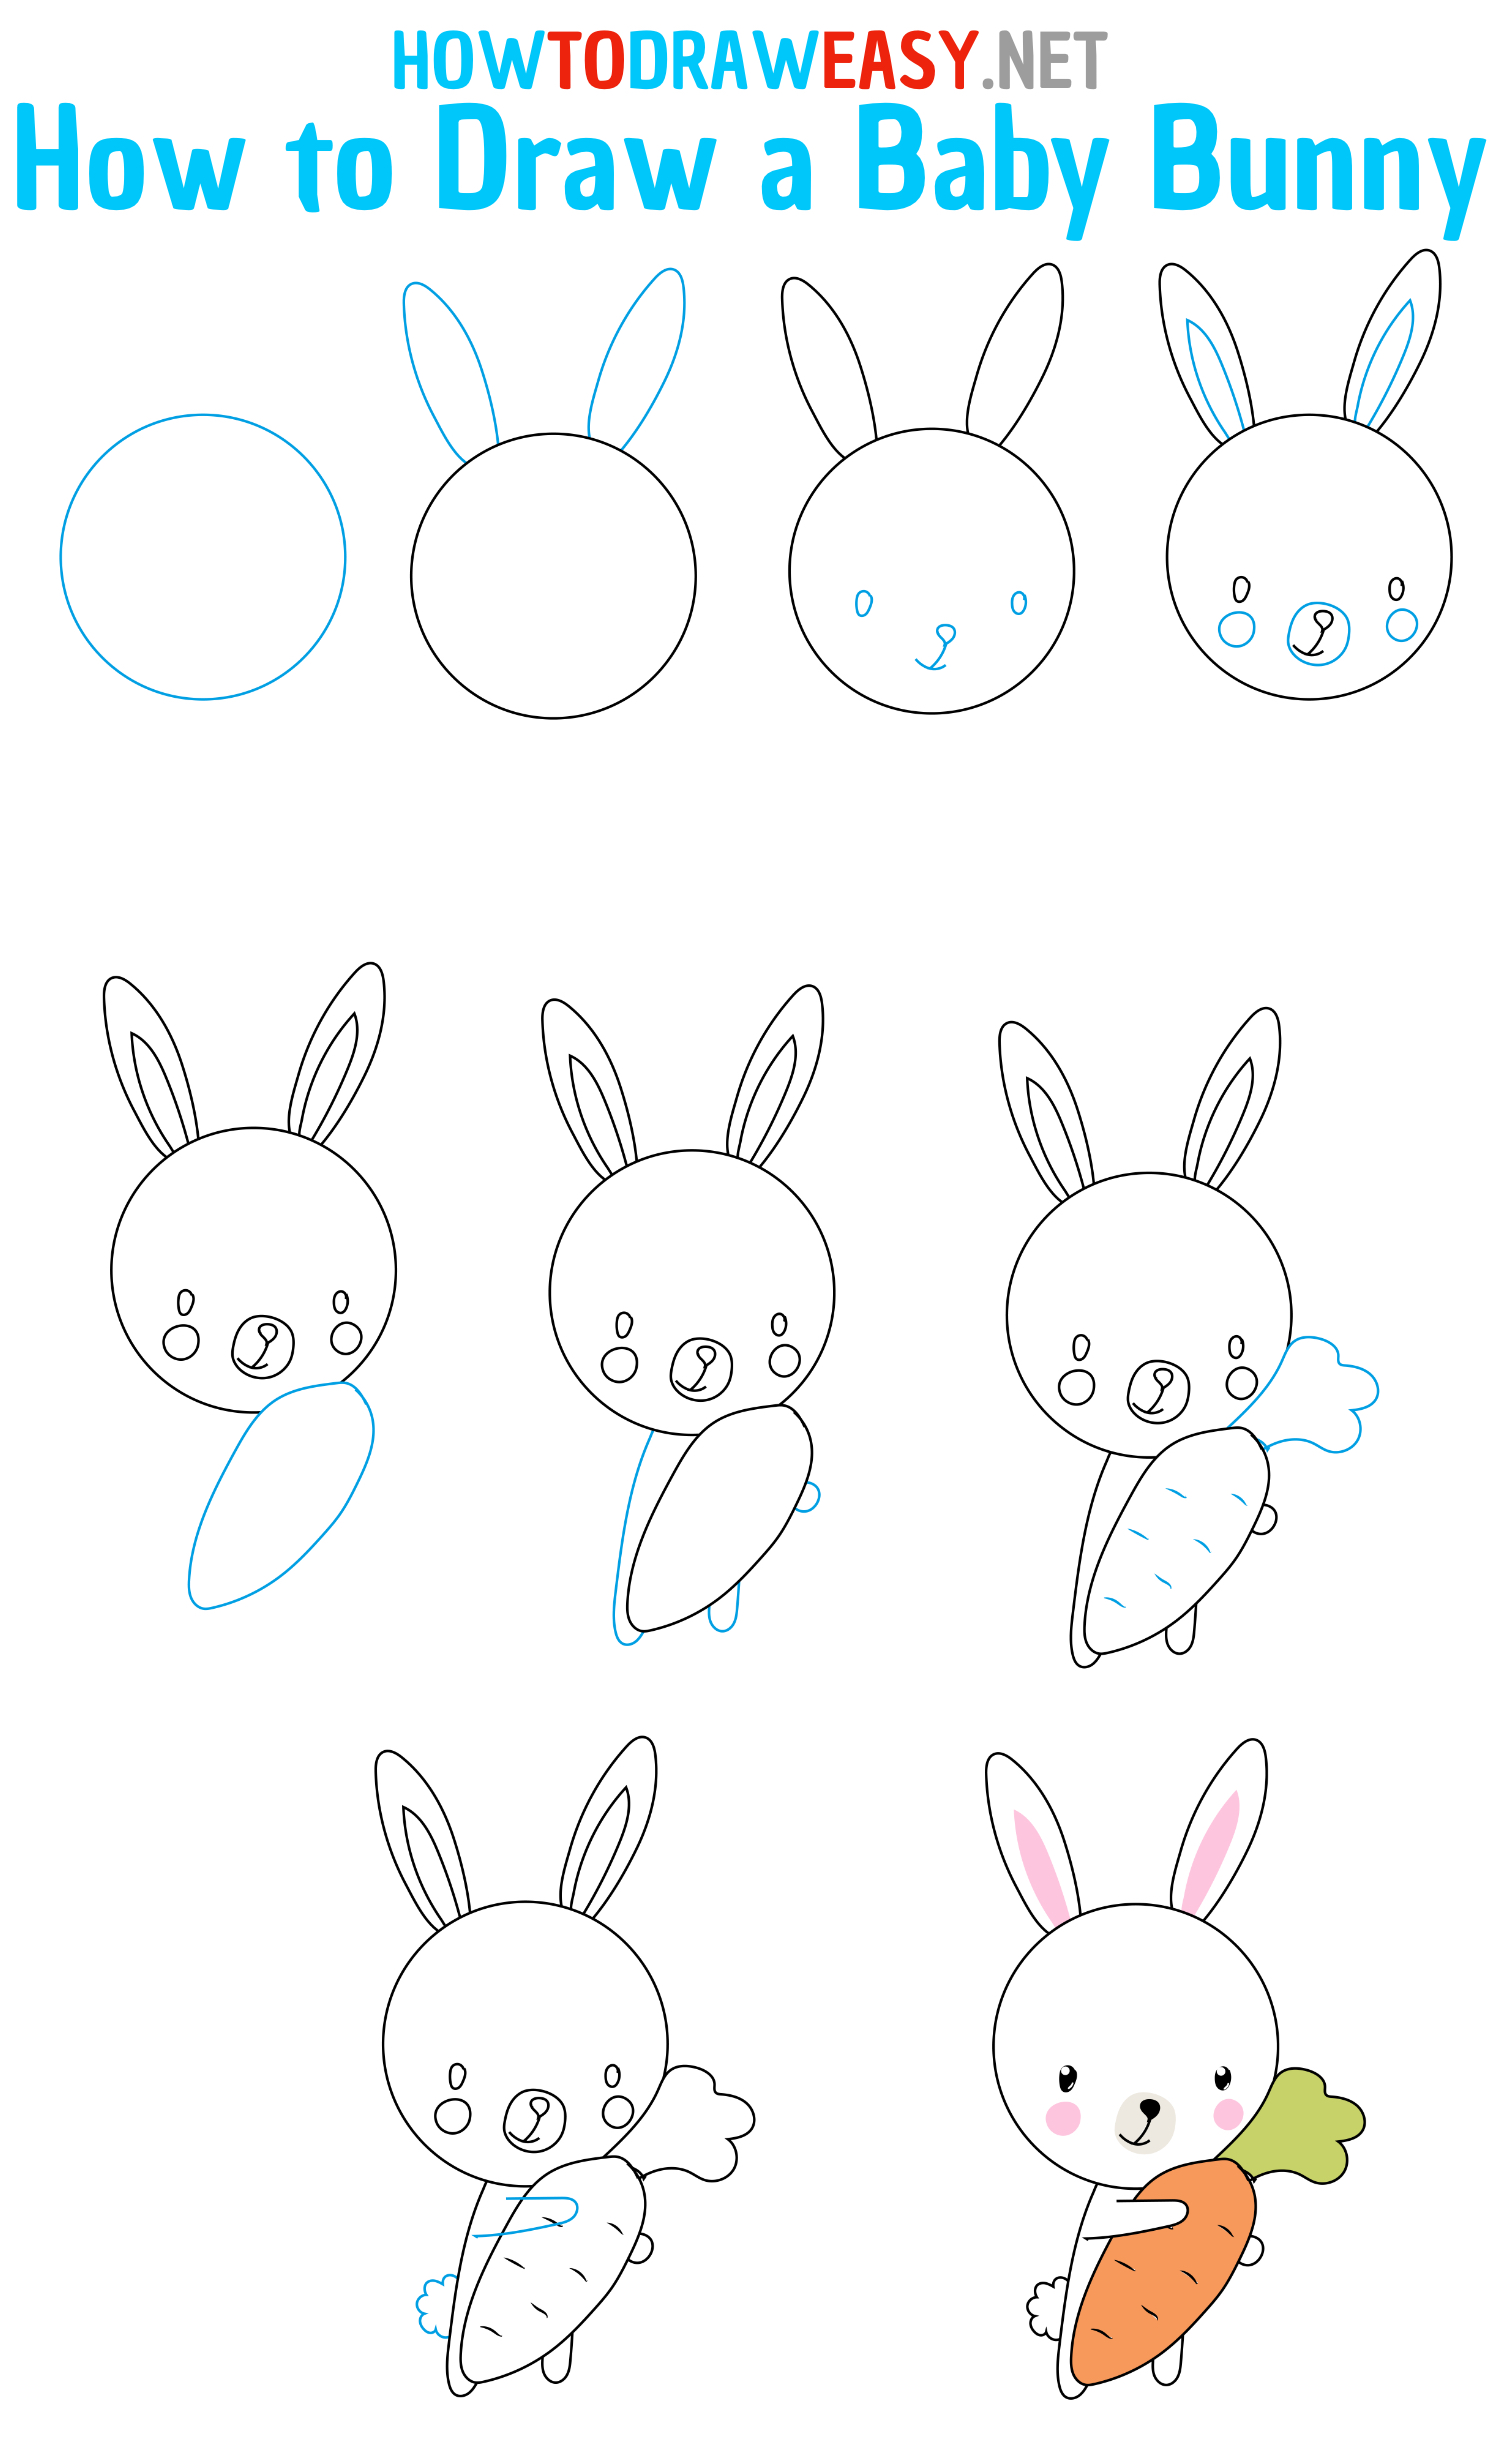 How to Draw a Baby Bunny Step by Step